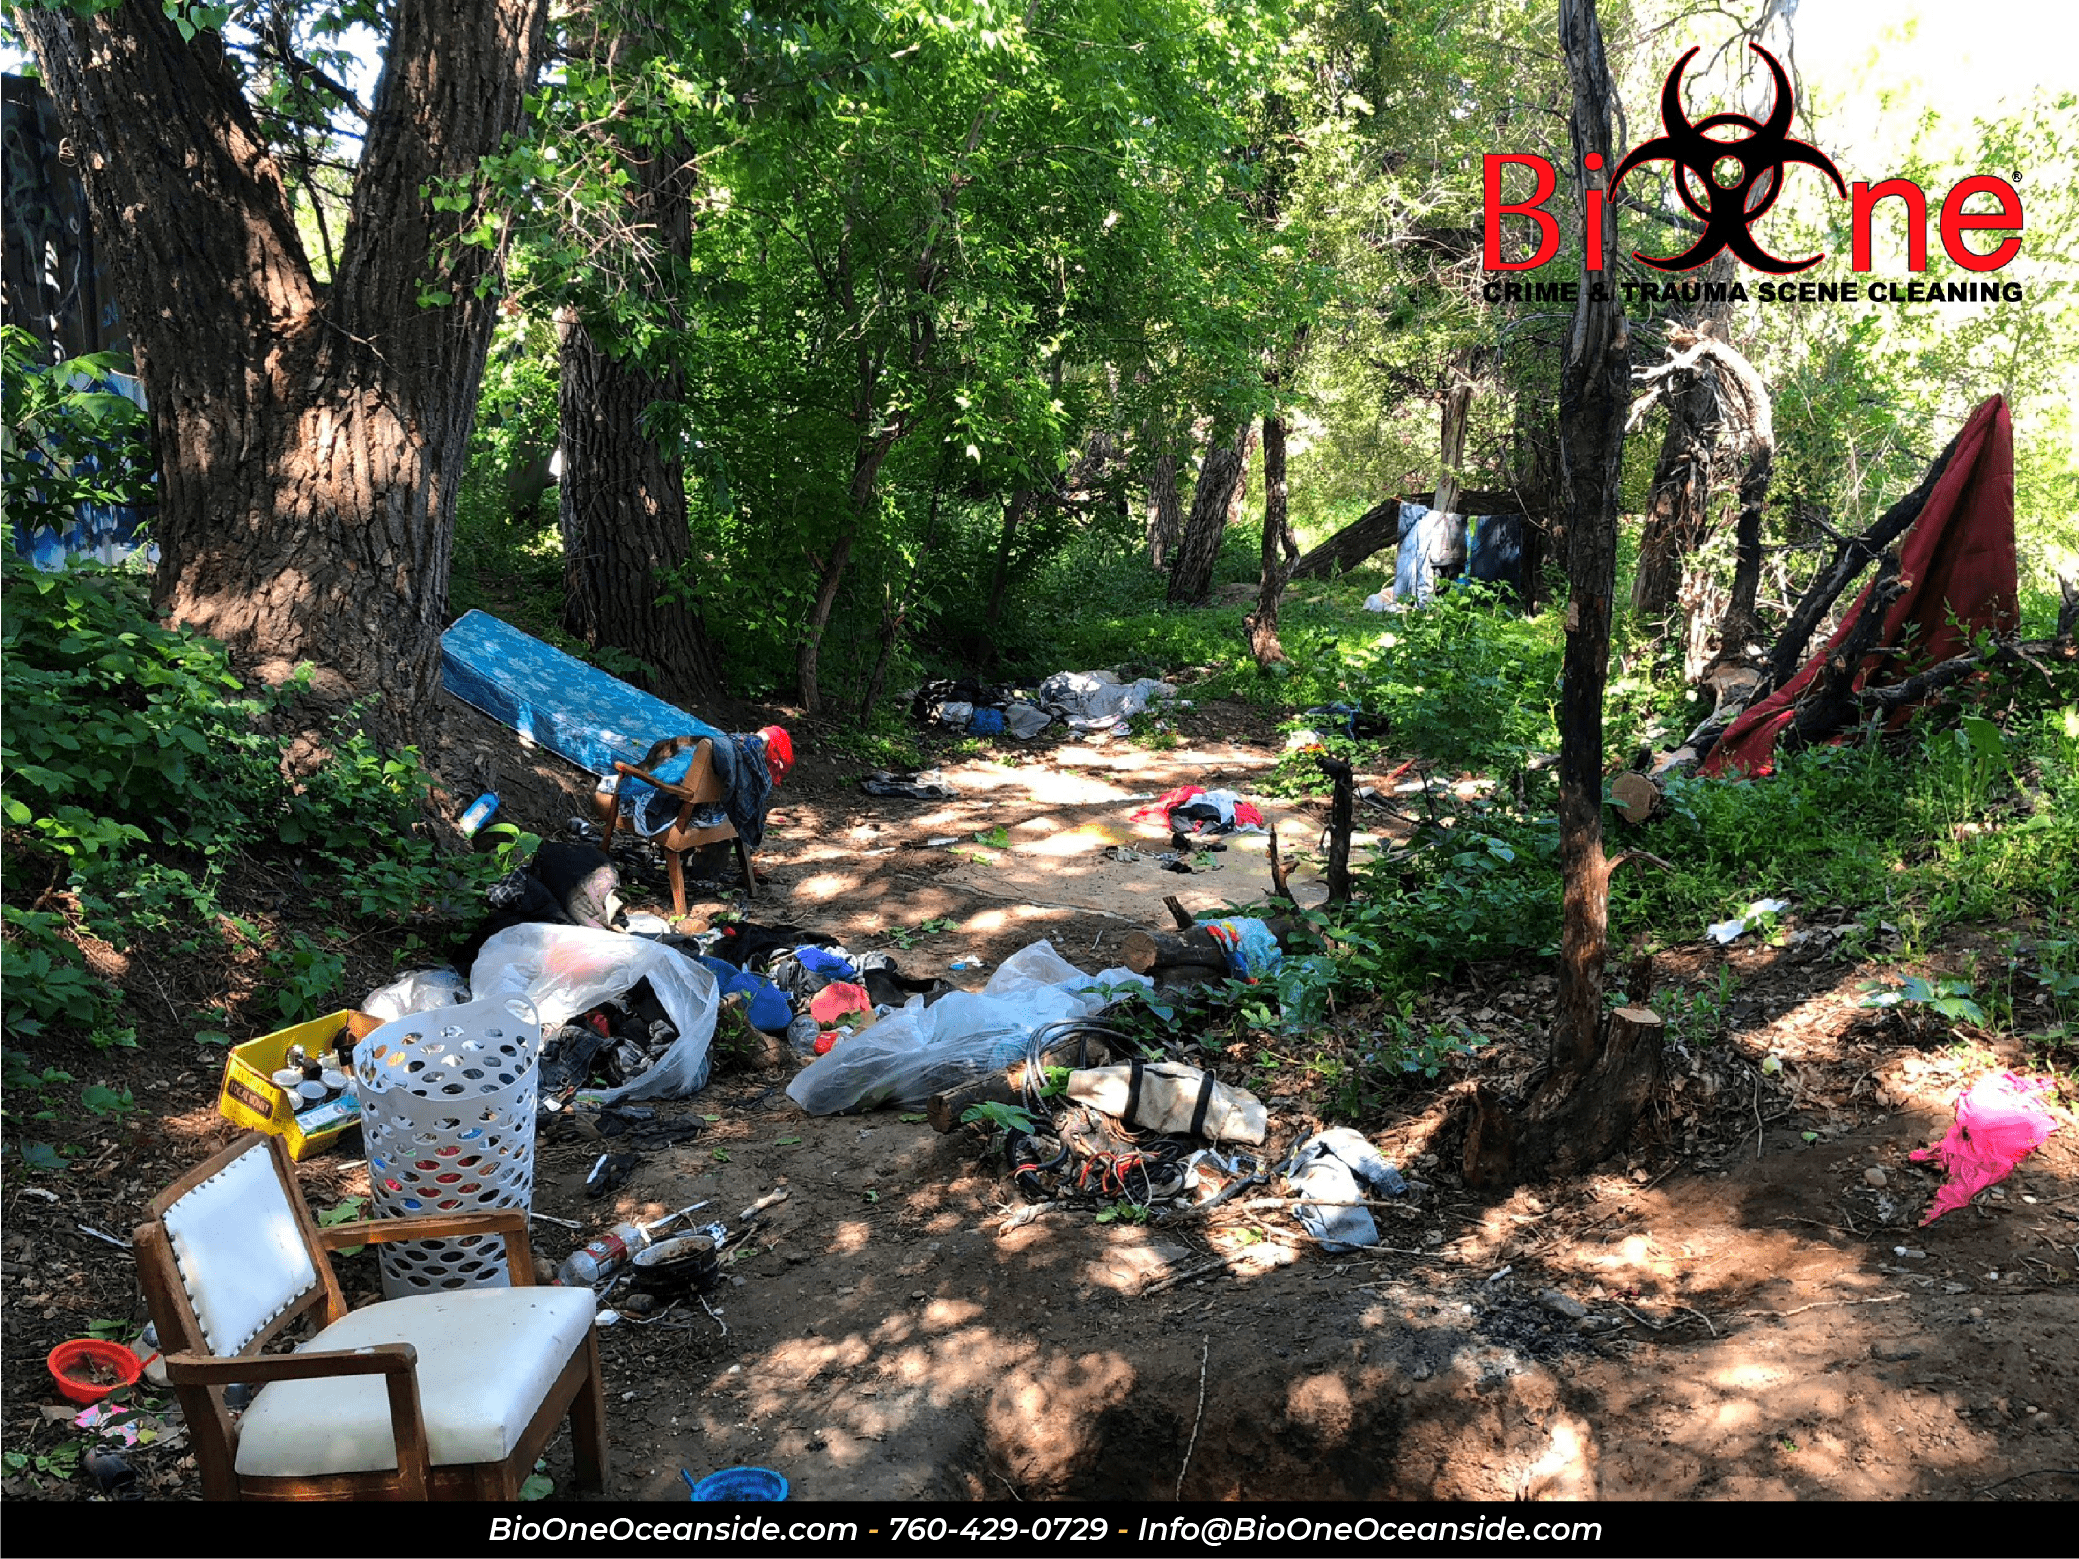 Image shows furniture and other items found in a homeless encampment.